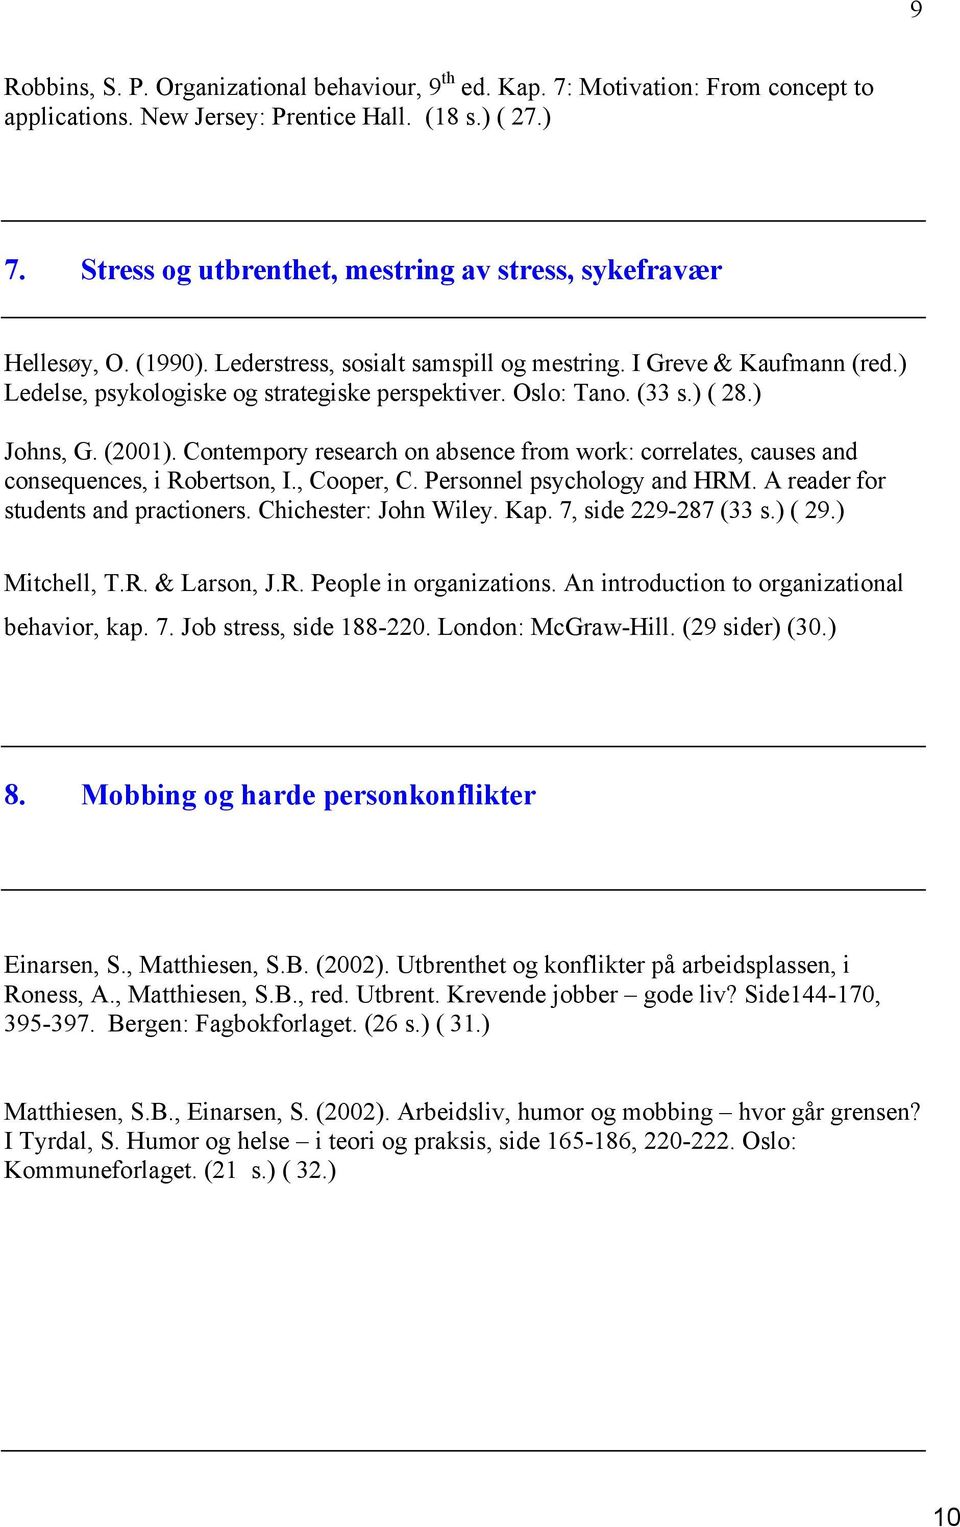 Oslo: Tano. (33 s.) ( 28.) Johns, G. (2001). Contempory research on absence from work: correlates, causes and consequences, i Robertson, I., Cooper, C. Personnel psychology and HRM.